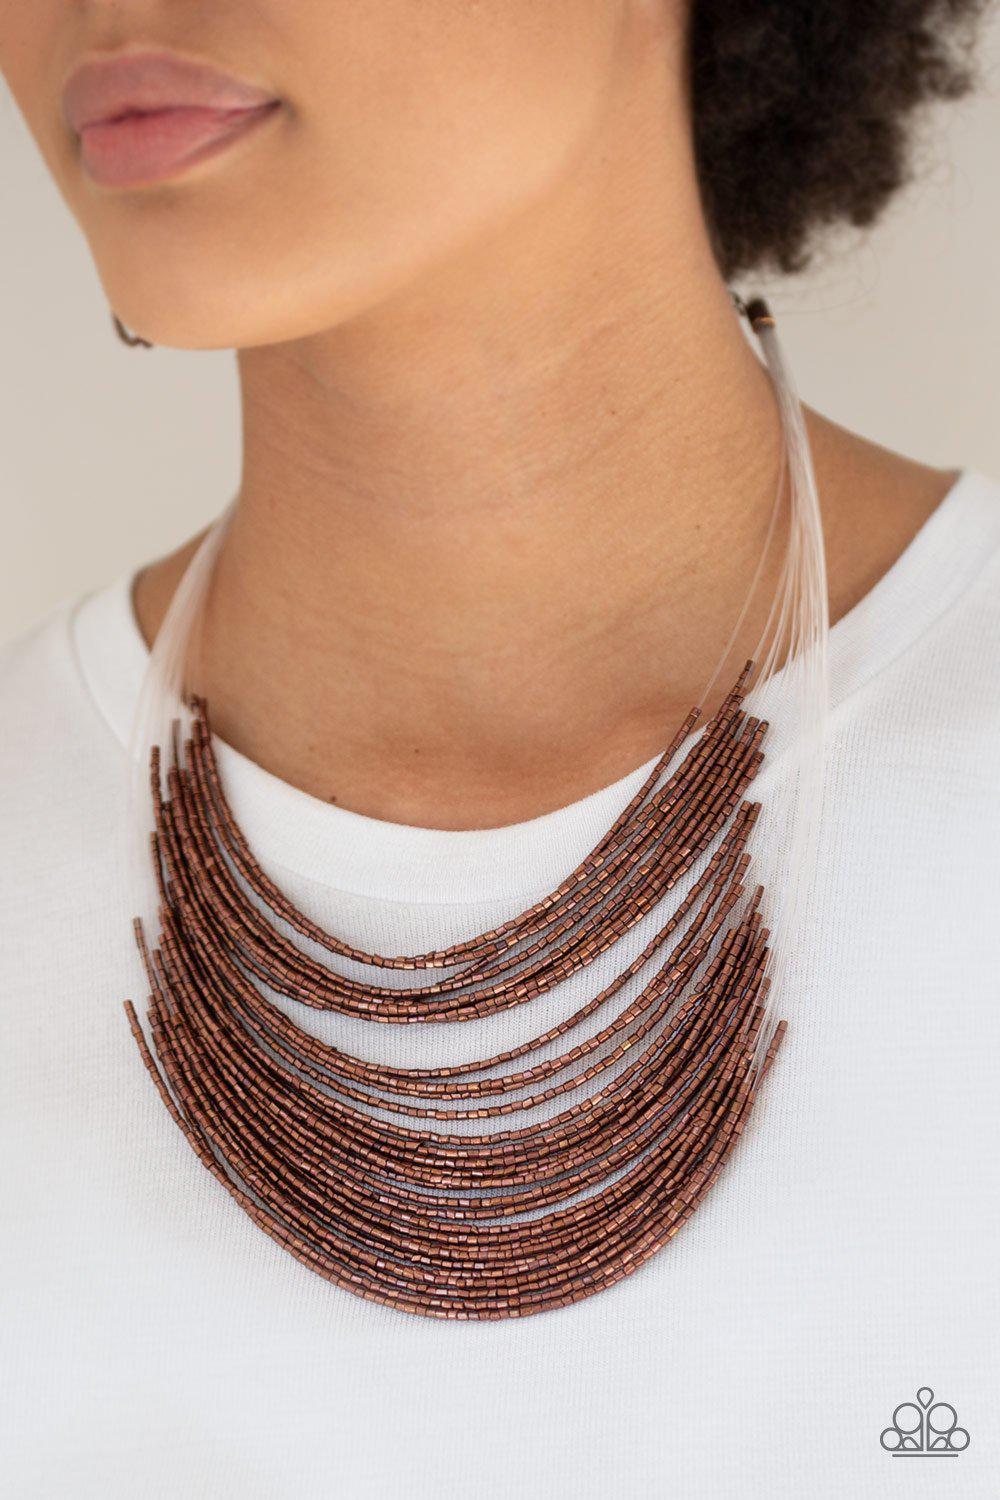 Catwalk Queen Copper Seed Bead Necklace - Paparazzi Accessories-CarasShop.com - $5 Jewelry by Cara Jewels